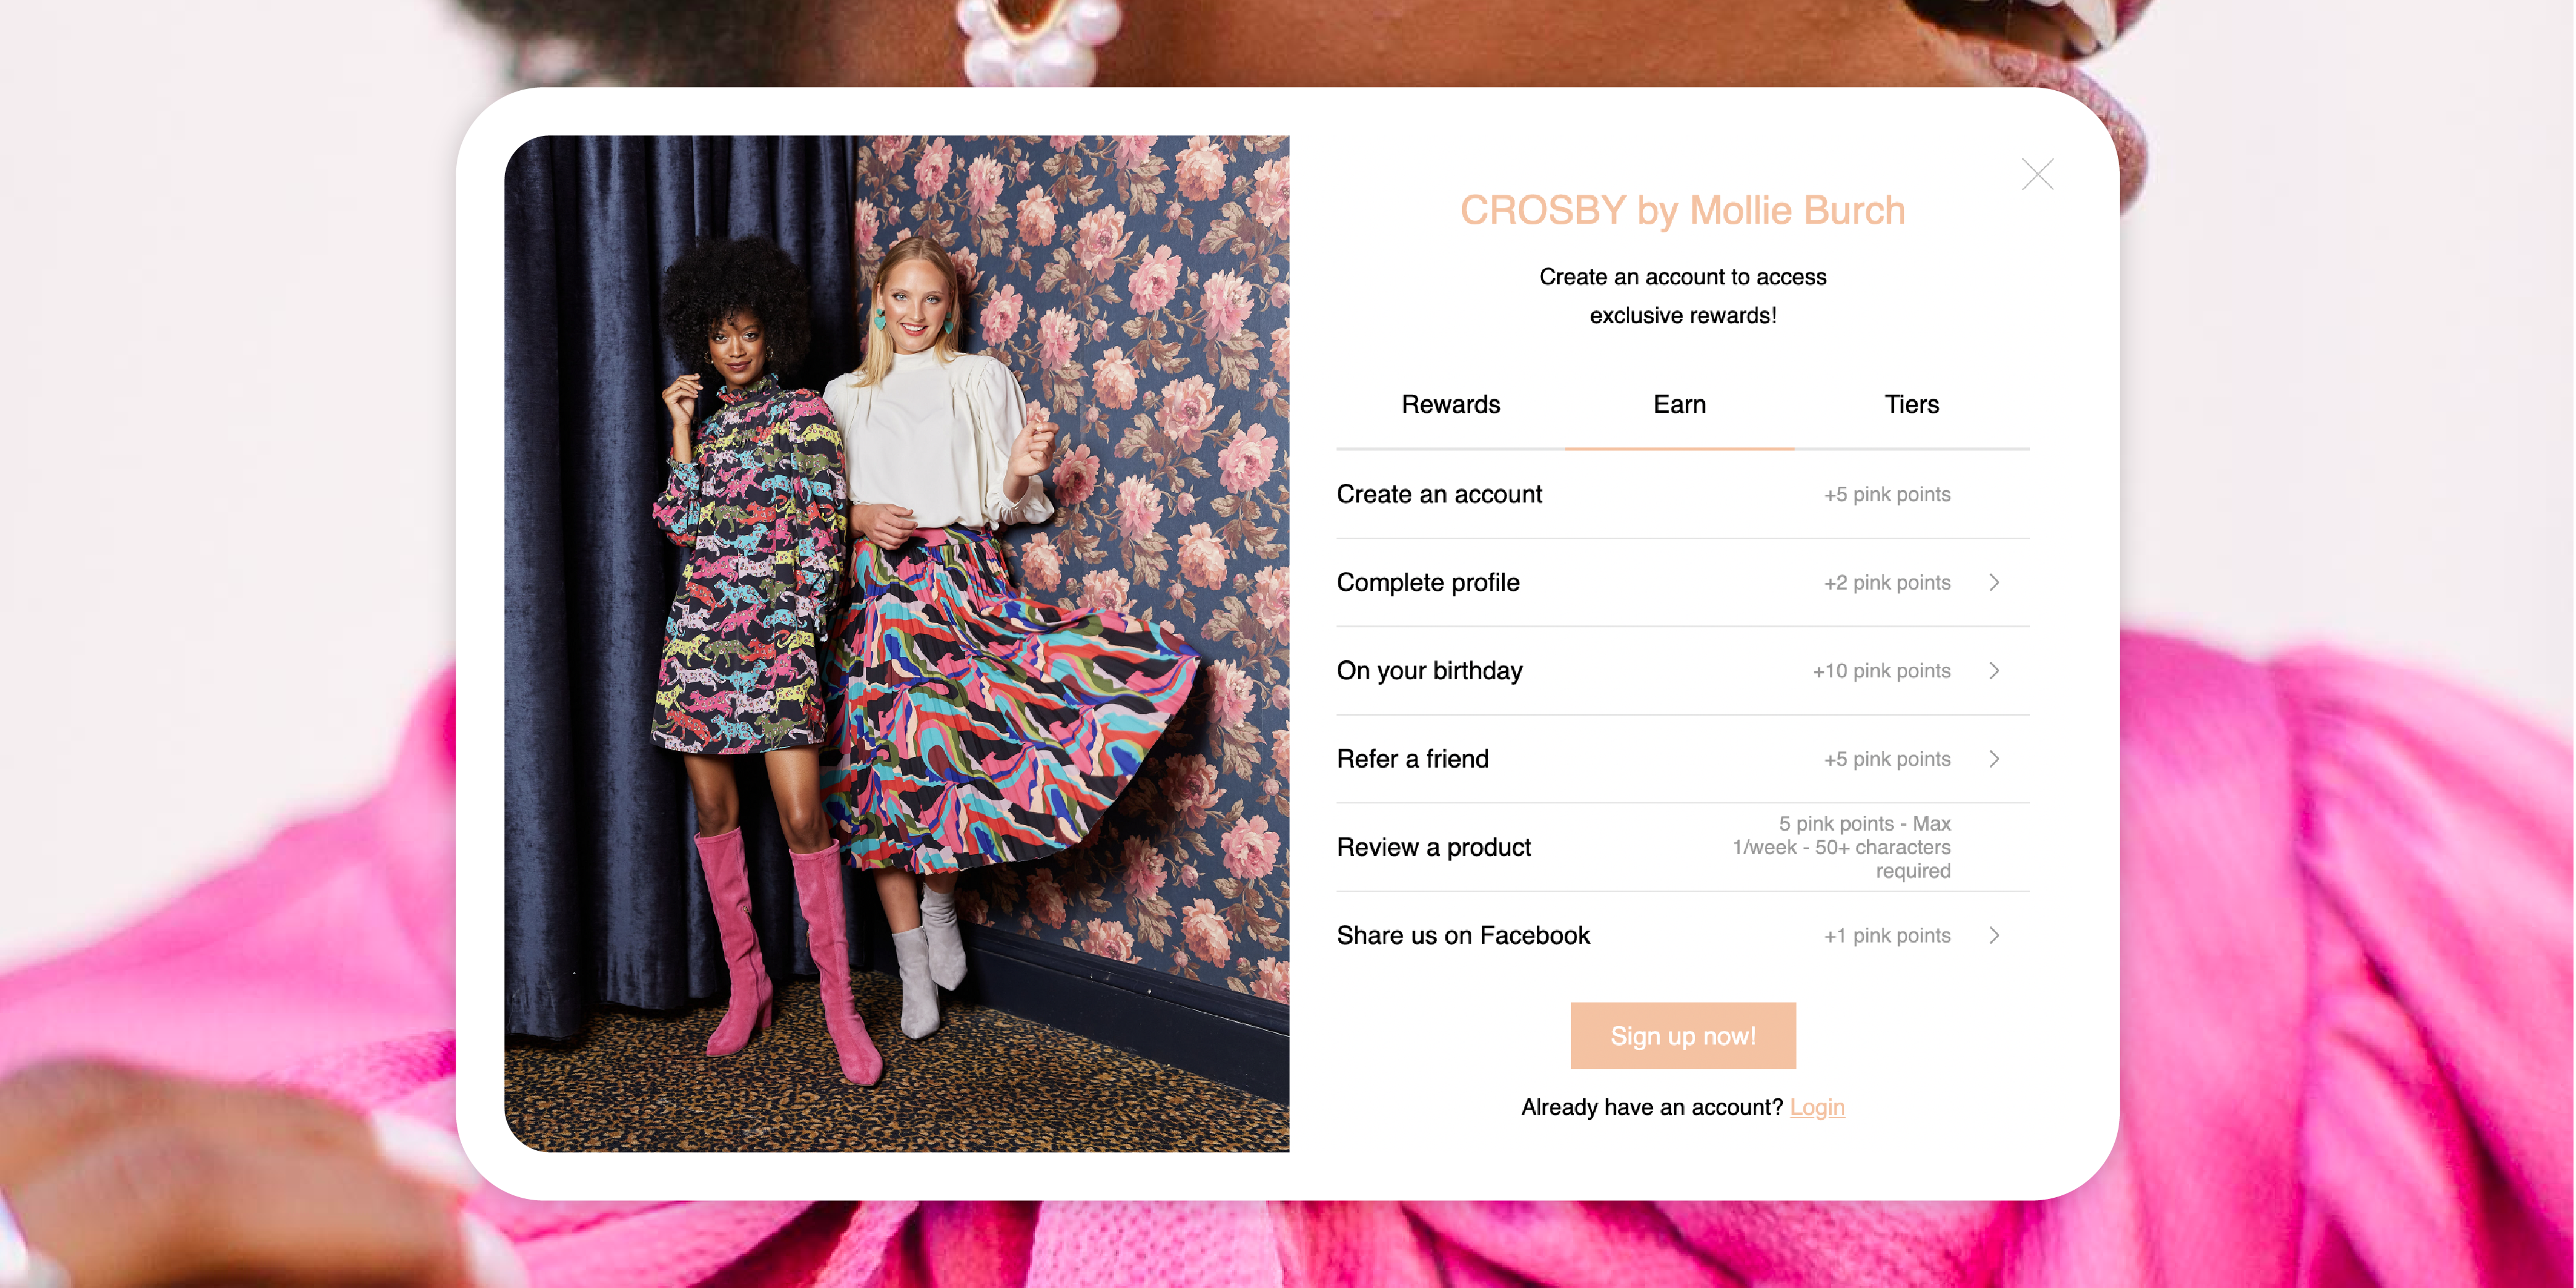 The eCommerce loyalty widget on Crosby by Mollie Birch's ecommerce site.